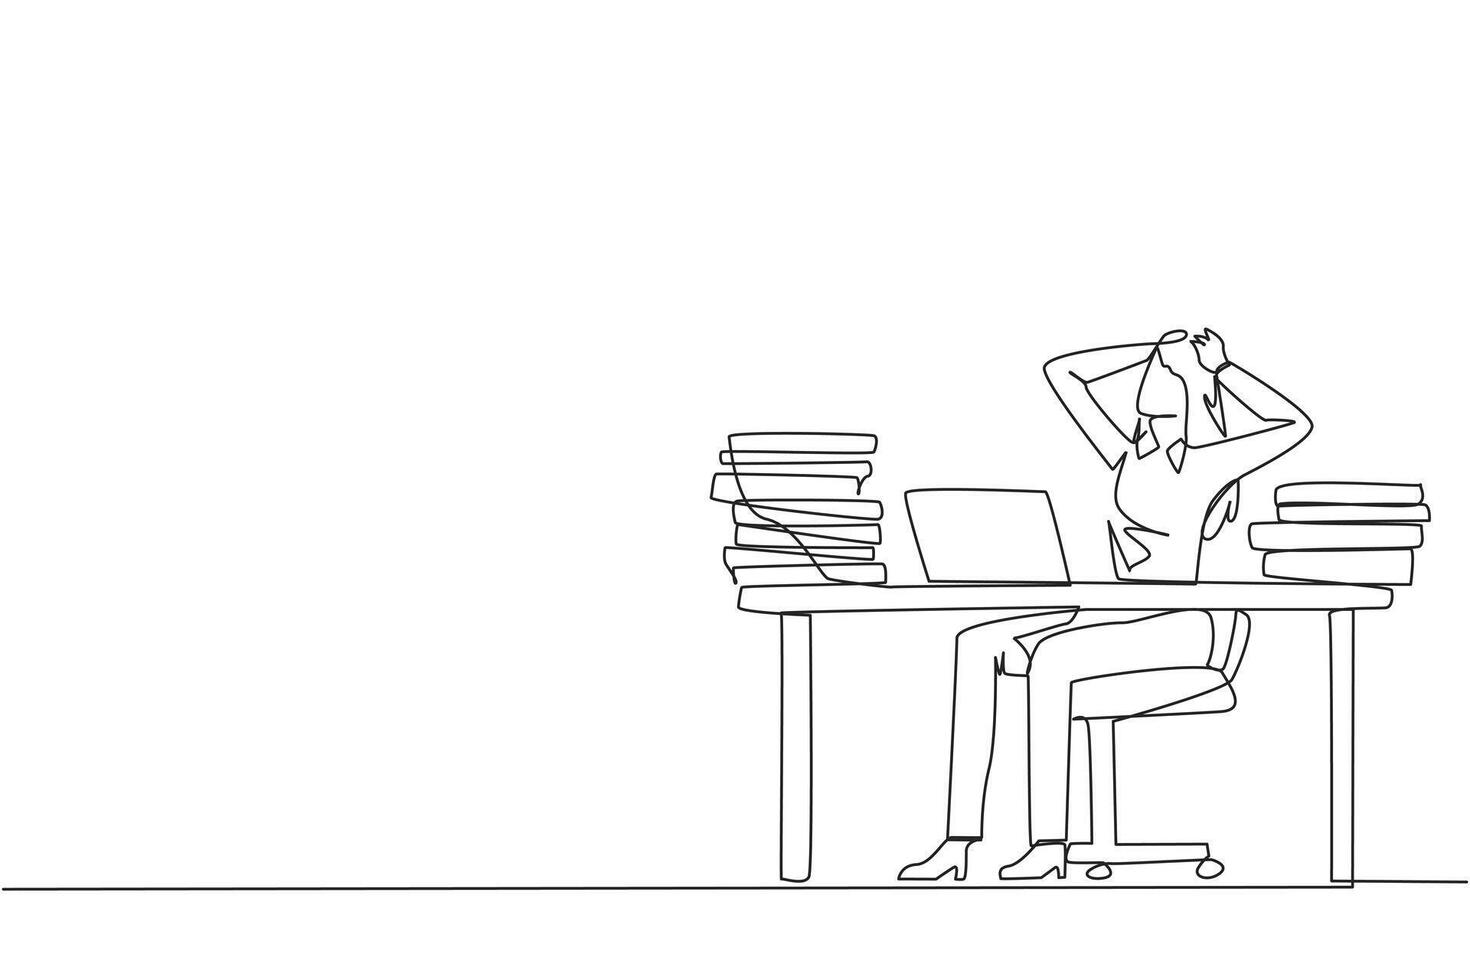 Single continuous line drawing businesswoman sitting on office chair. Curious to see stock price on a laptop screen that don't increase. Stressful businesswoman. One line design vector illustration